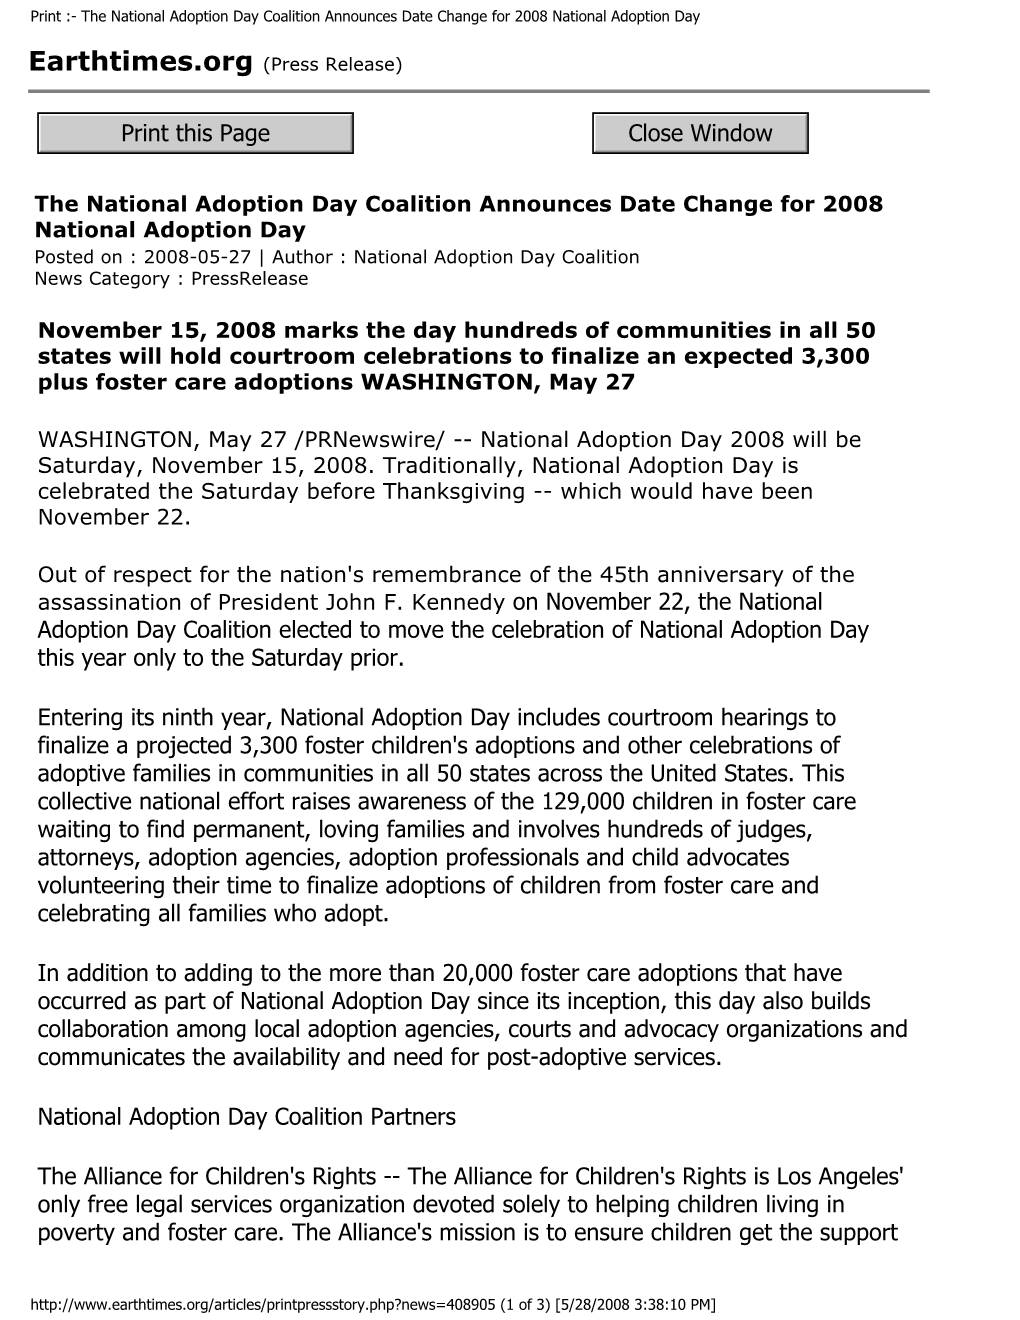 The National Adoption Day Coalition Announces Date Change for 2008 National Adoption Day